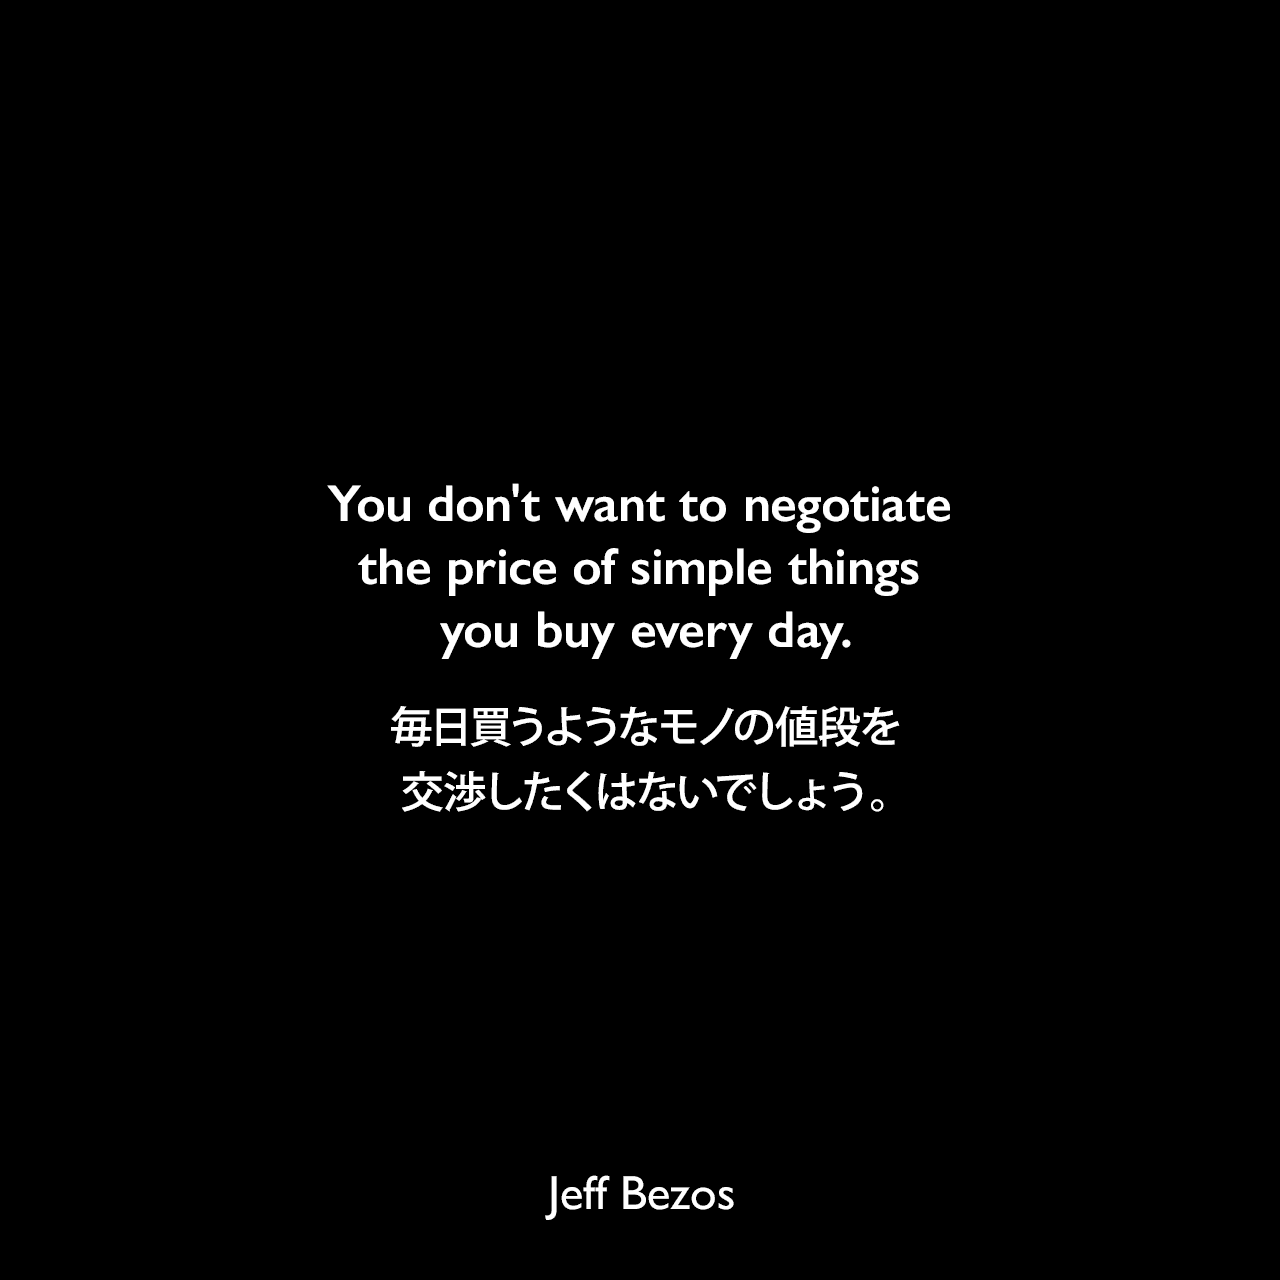 You don't want to negotiate the price of simple things you buy every day.毎日買うようなモノの値段を交渉したくはないでしょう。Jeff Bezos